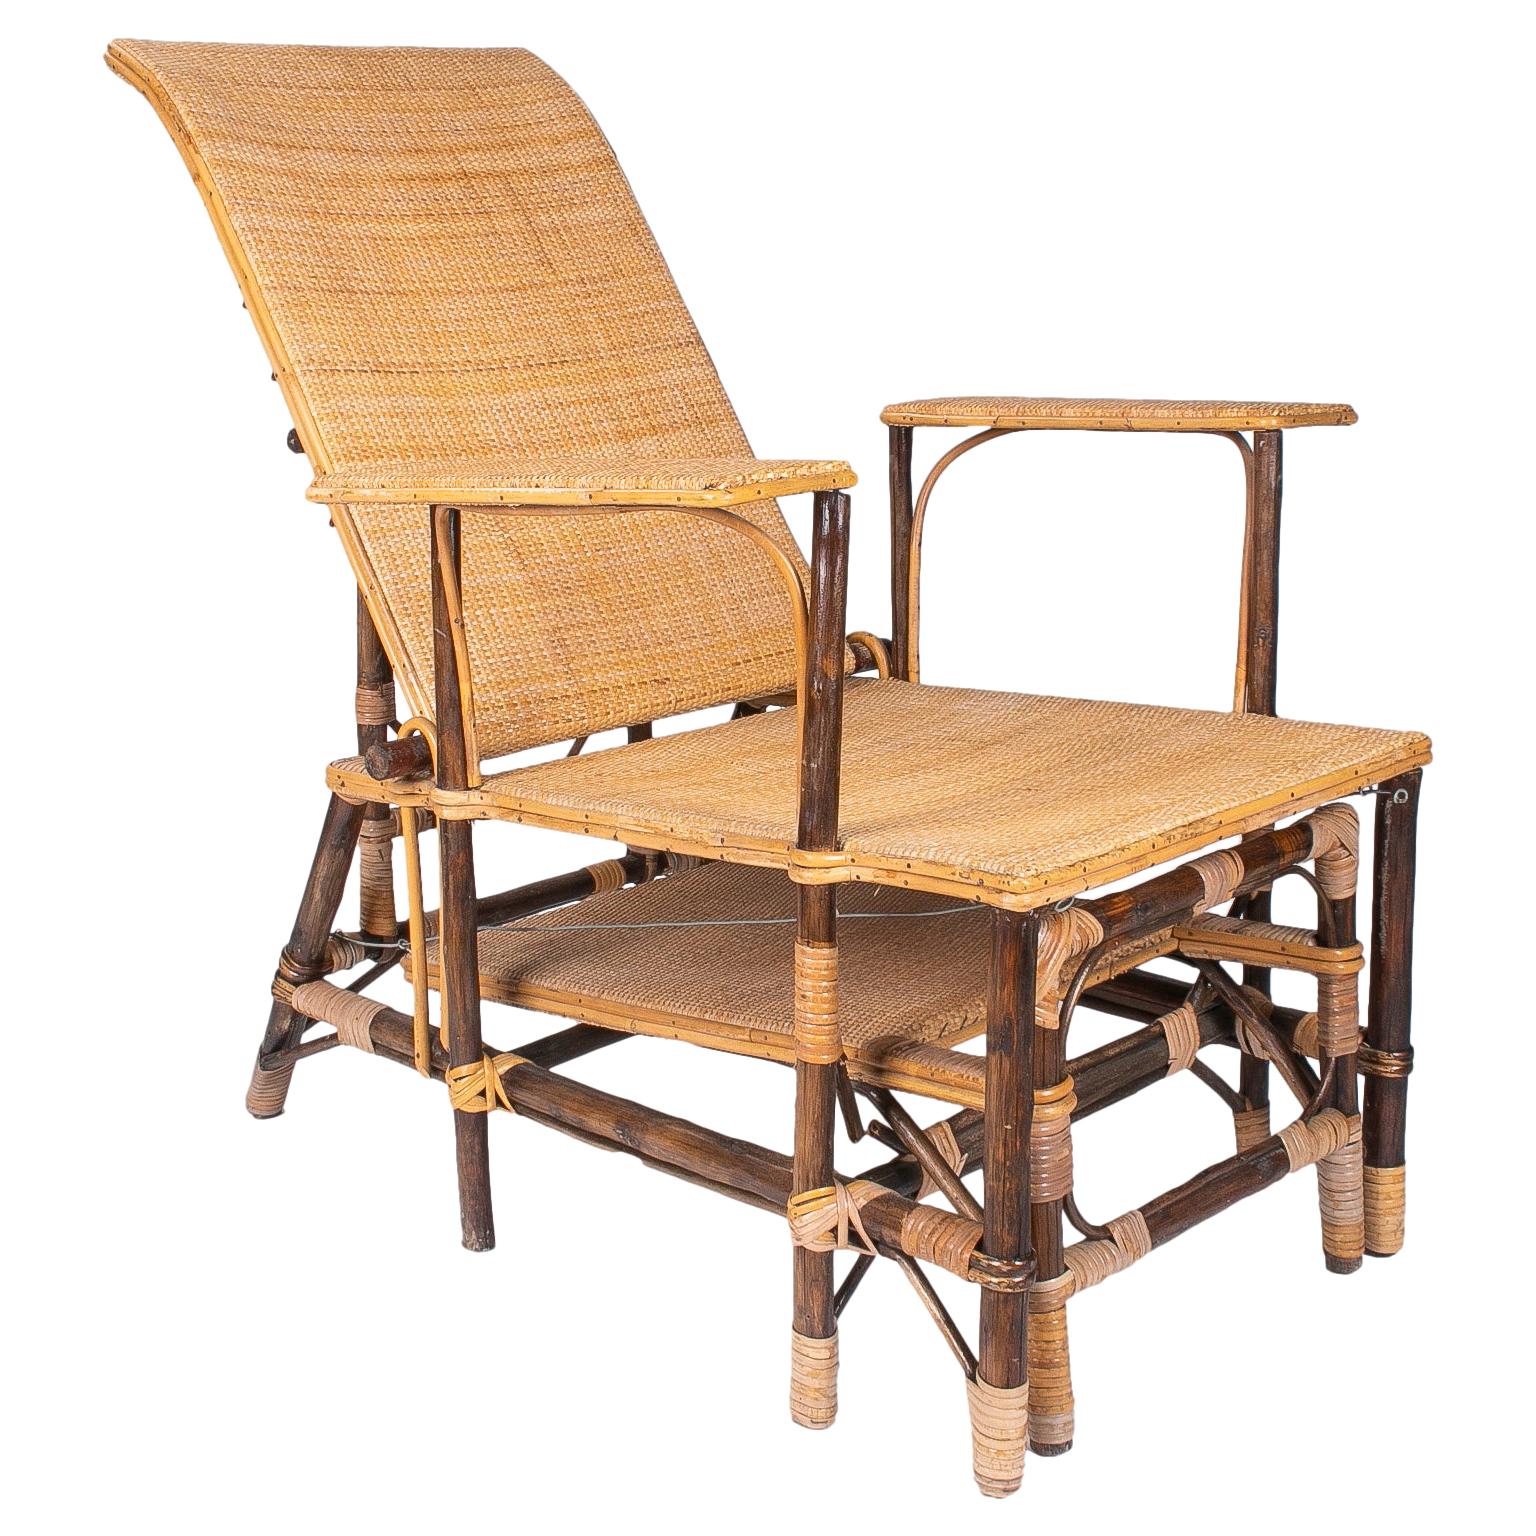 1980s Spanish Woven Wicker & Bamboo Sunbathing Lounge Chair For Sale